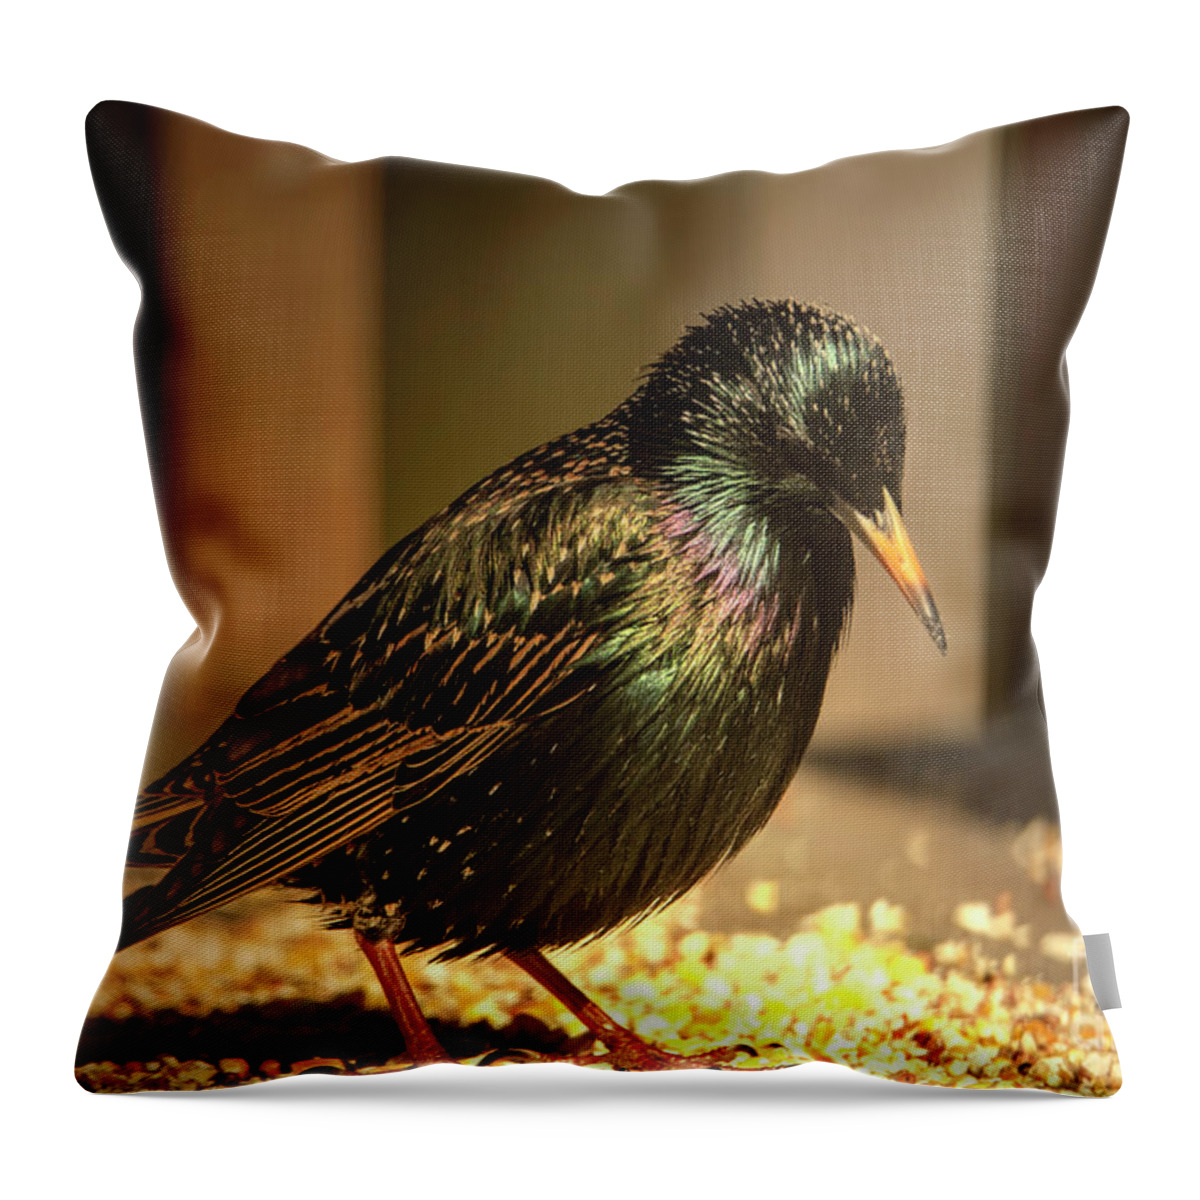 Bird Throw Pillow featuring the photograph The Bright Shinny Starling Bird by Sandra J's